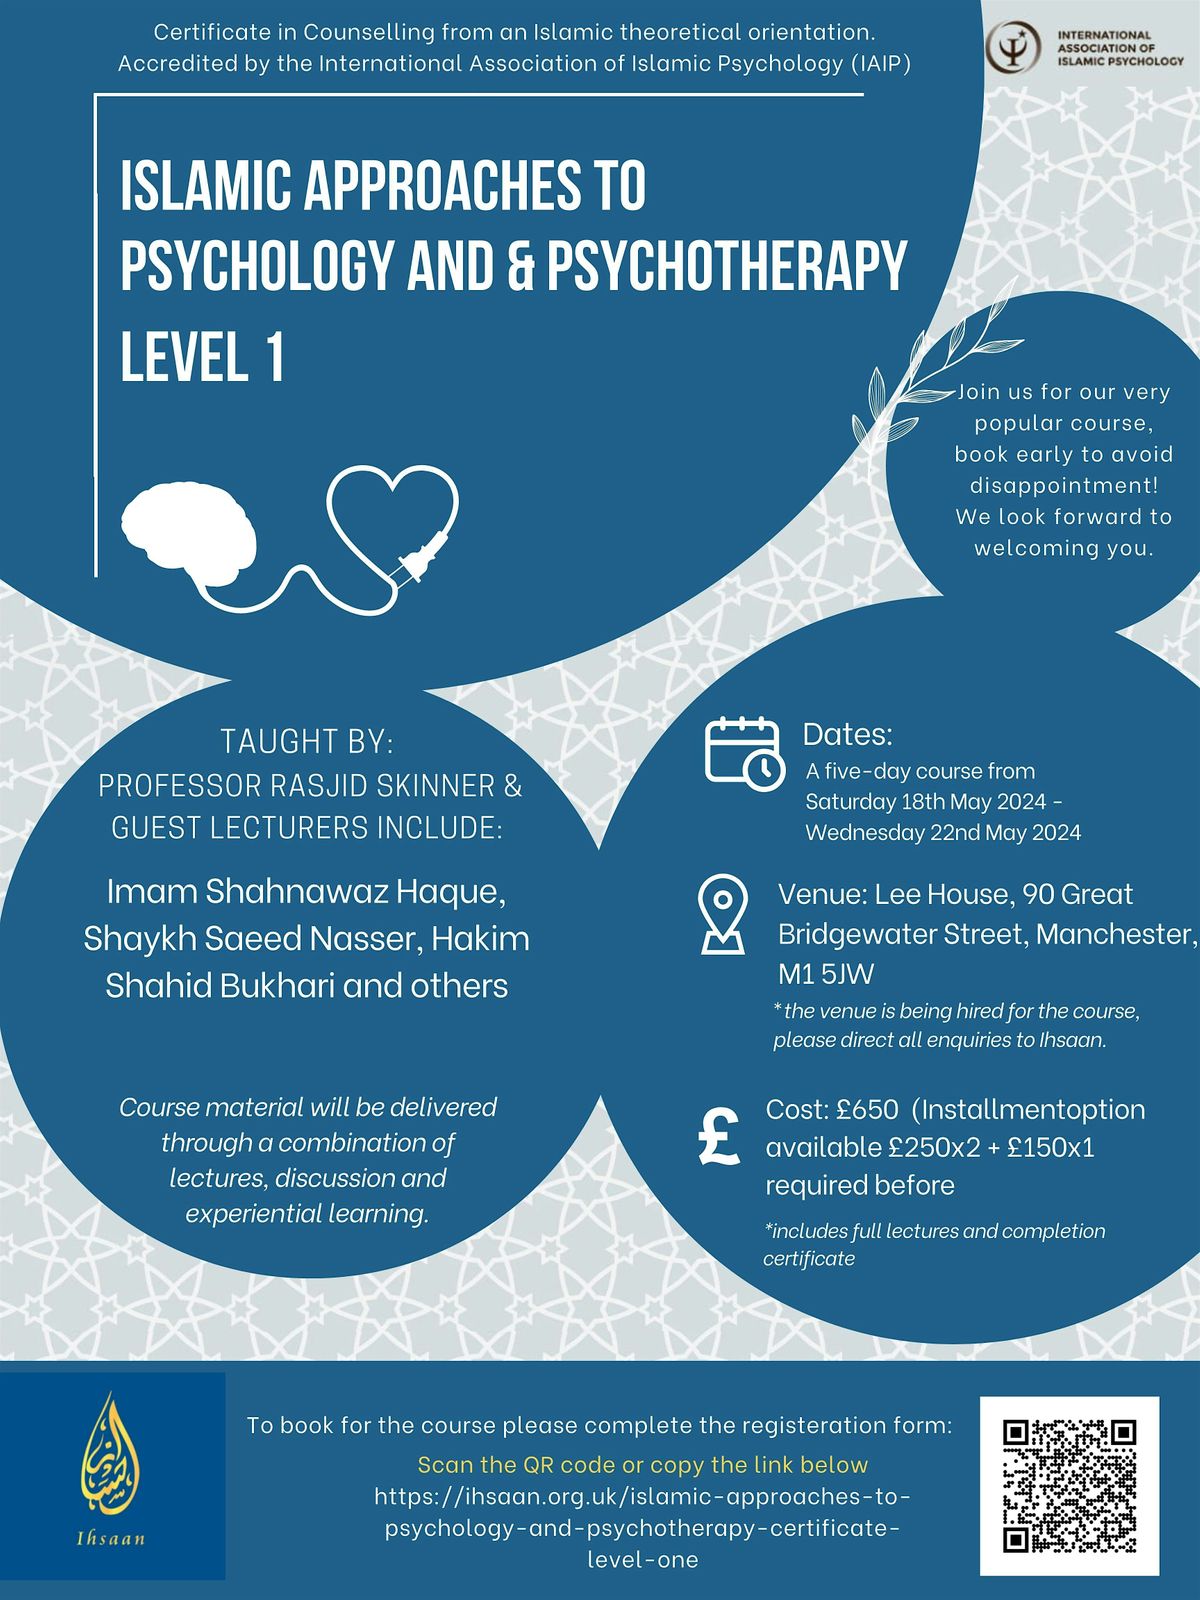 Islamic Approaches to Psychology and Psychotherapy Certficate Level 1